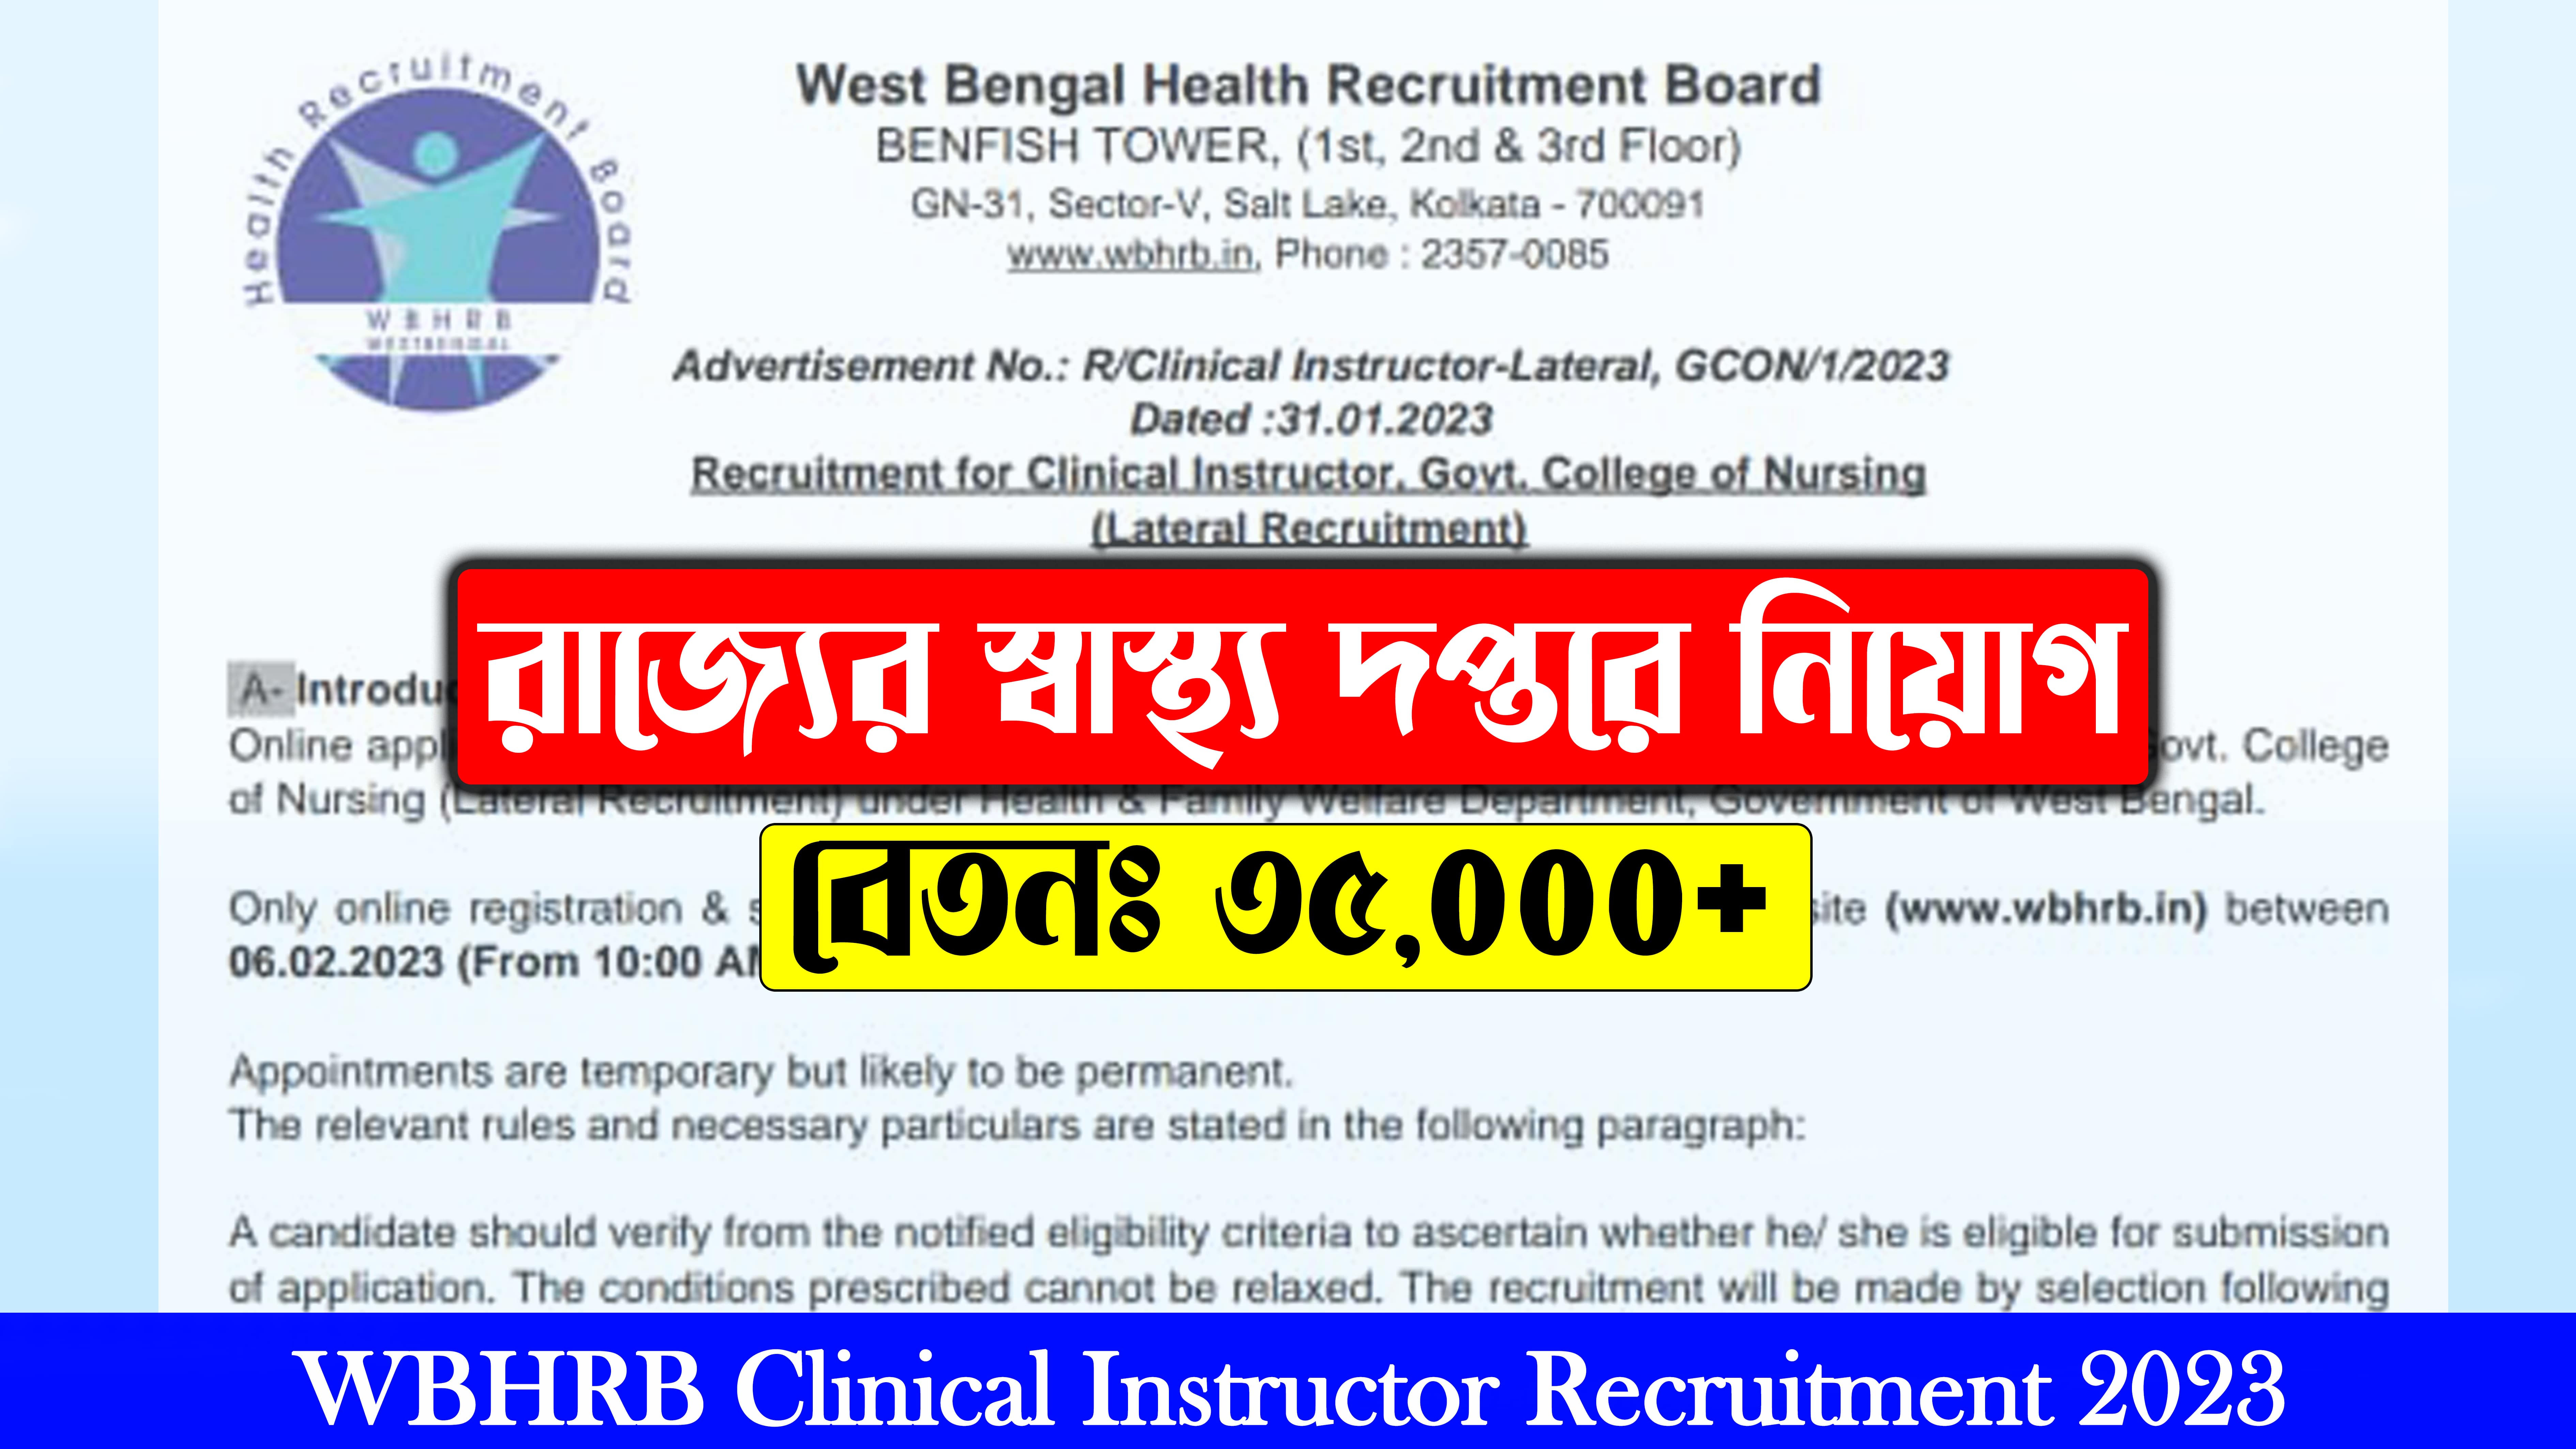 WBHRB Clinical Instructor Recruitment 2023